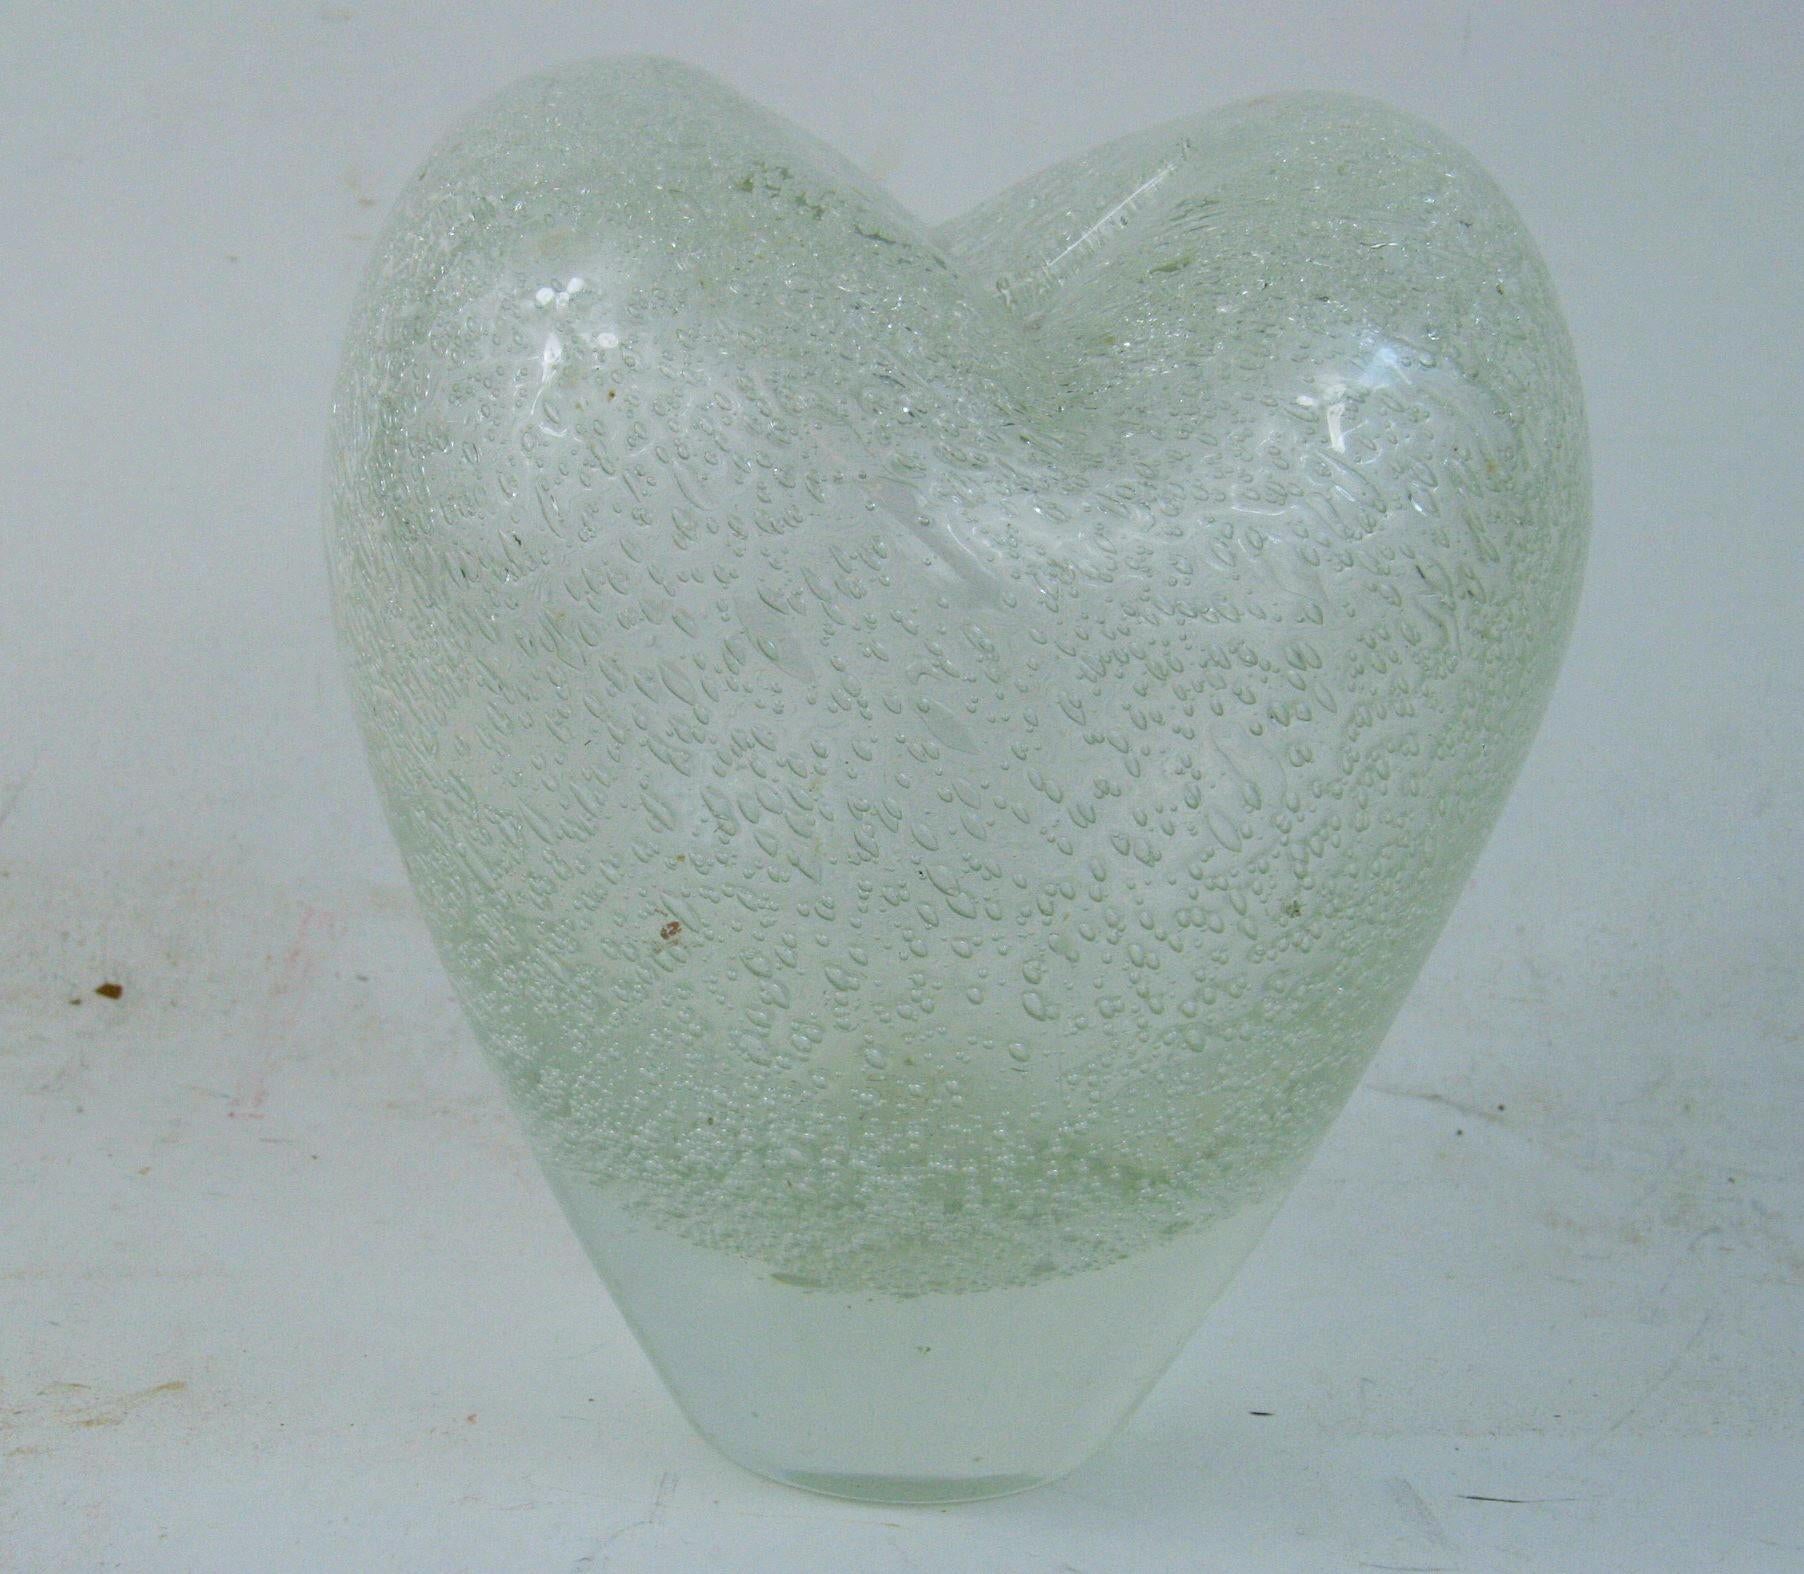  Seguso Murano Heart Shaped Vase/Sculpture In Good Condition For Sale In Douglas Manor, NY